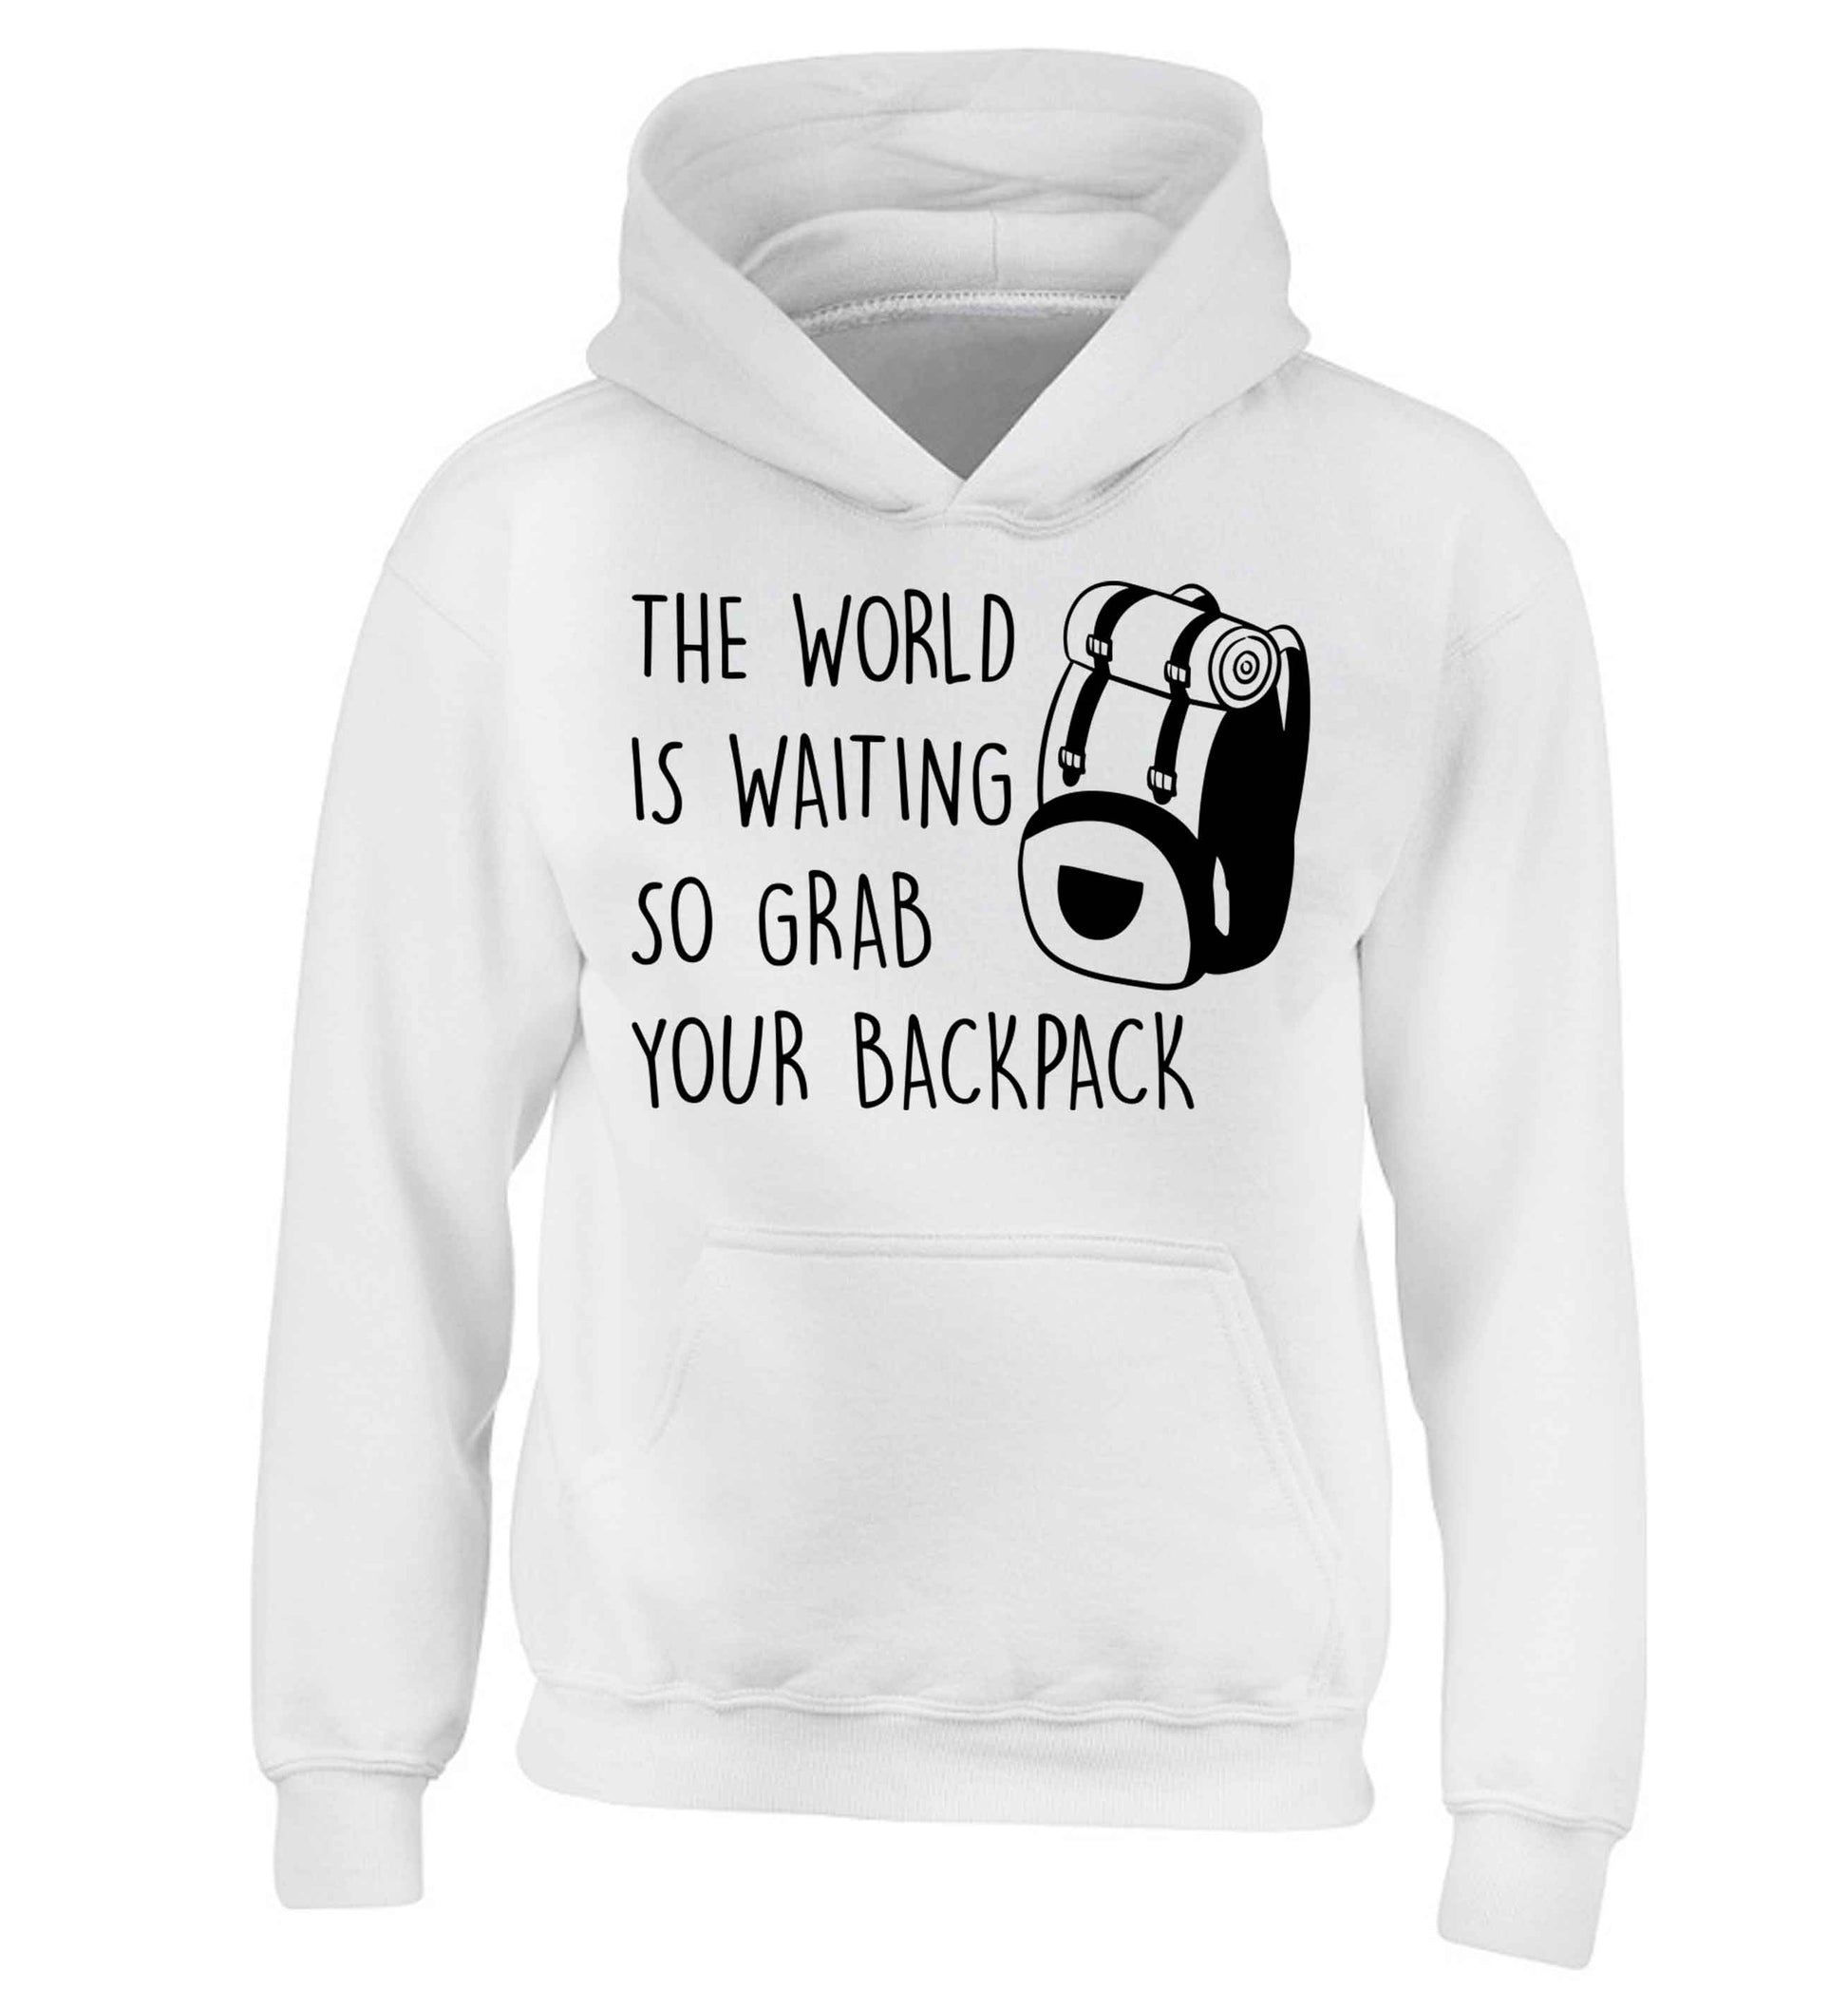 The world is waiting so grab your backpack children's white hoodie 12-13 Years